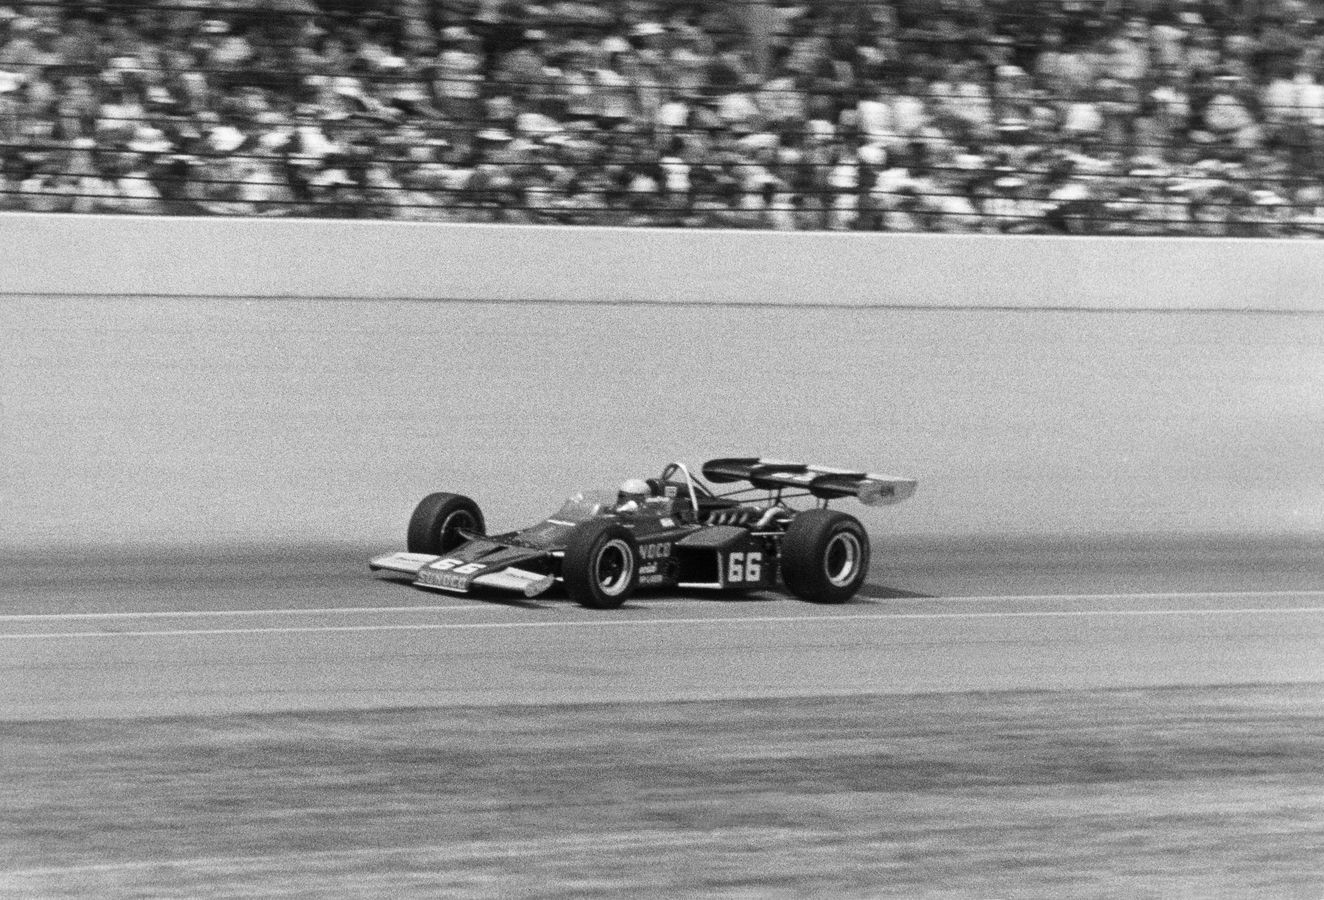 Mark Donohue driving the #66 in 1972